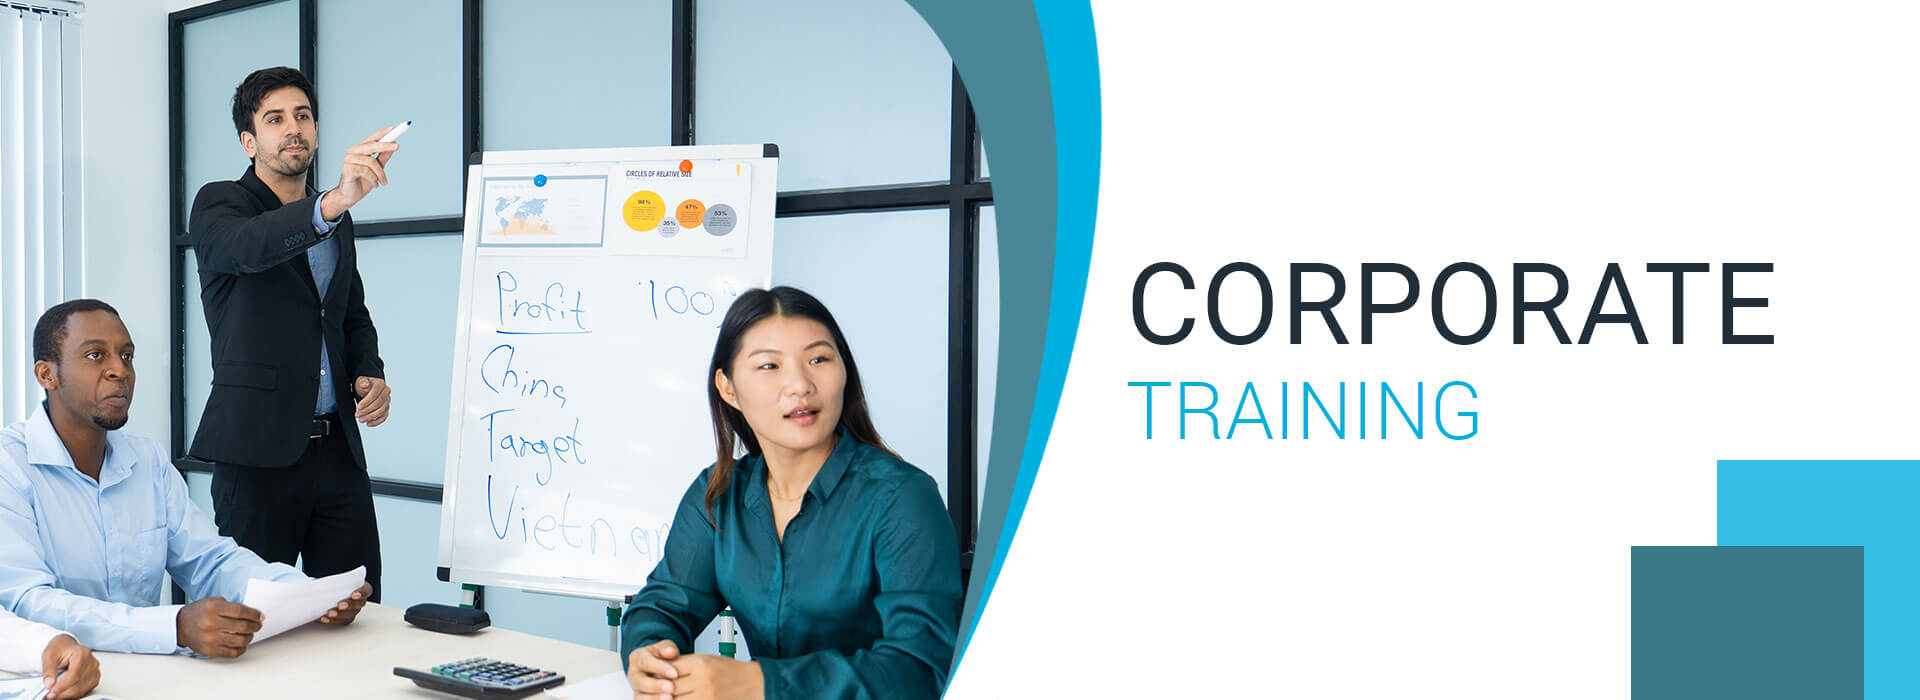 Our Corporate Training